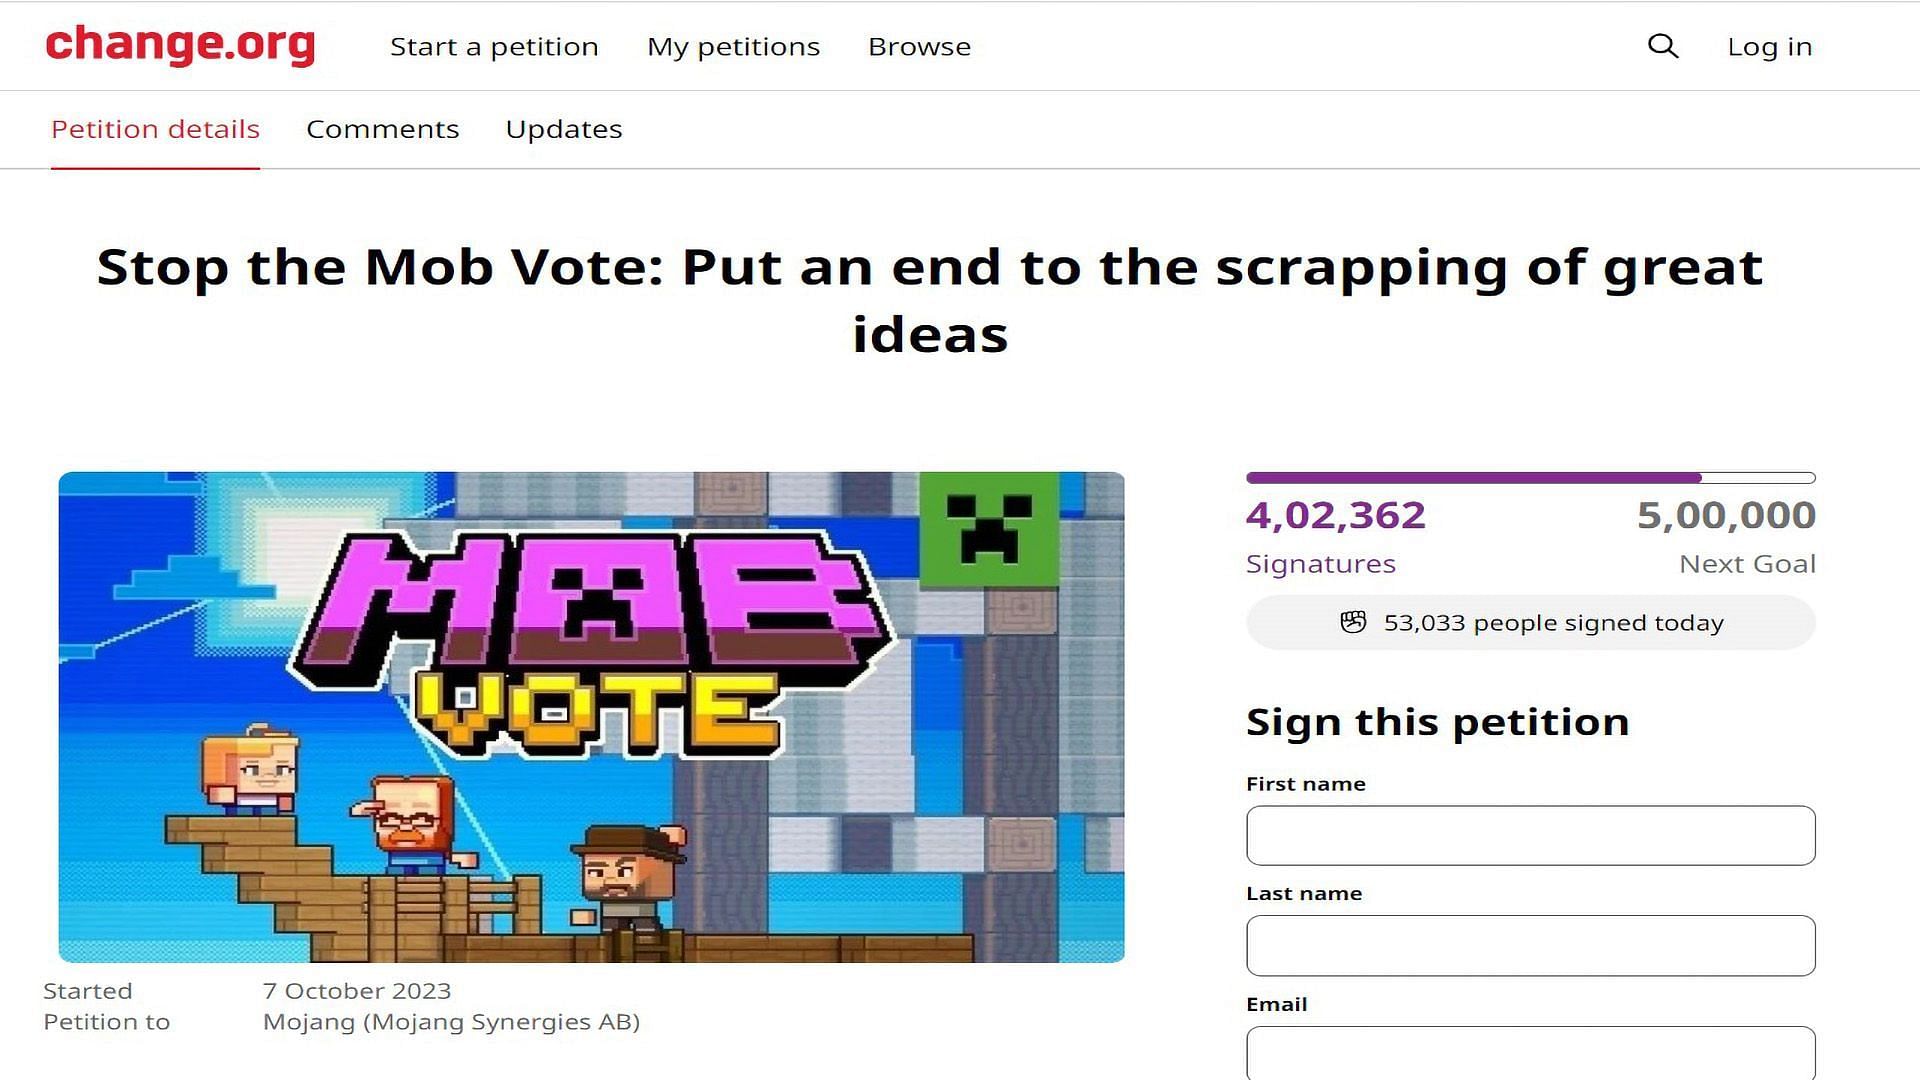 Minecraft players start petition, make art to protest yearly mob